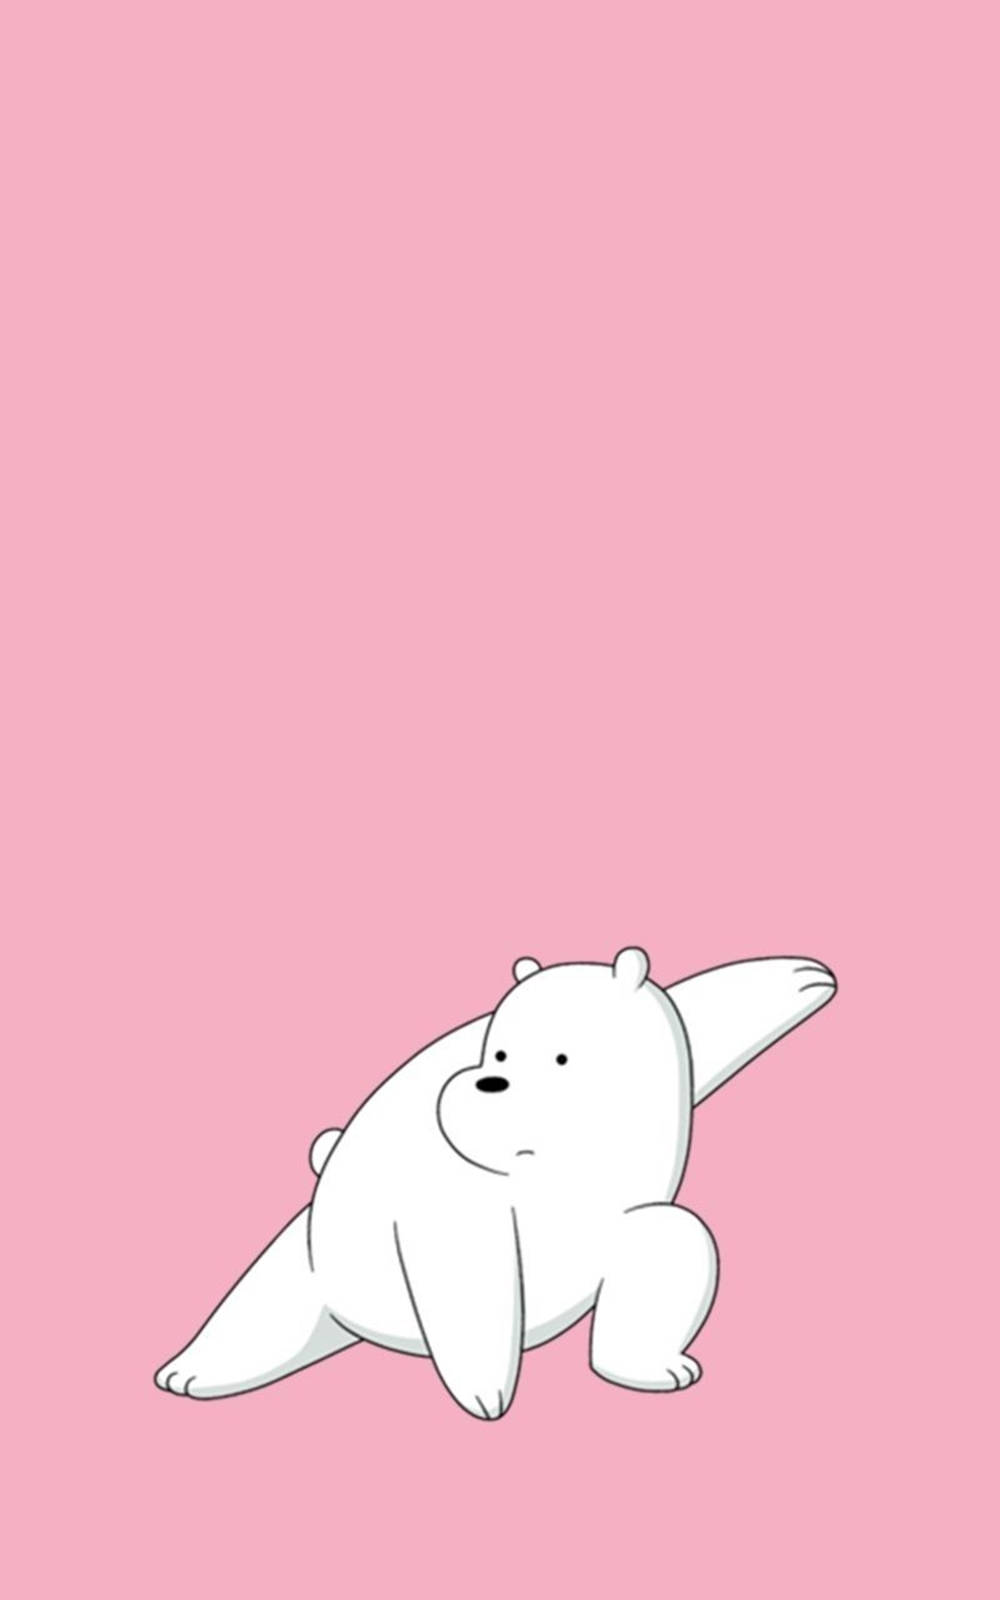 Ice Bear Cartoon In Fighting Stance Background